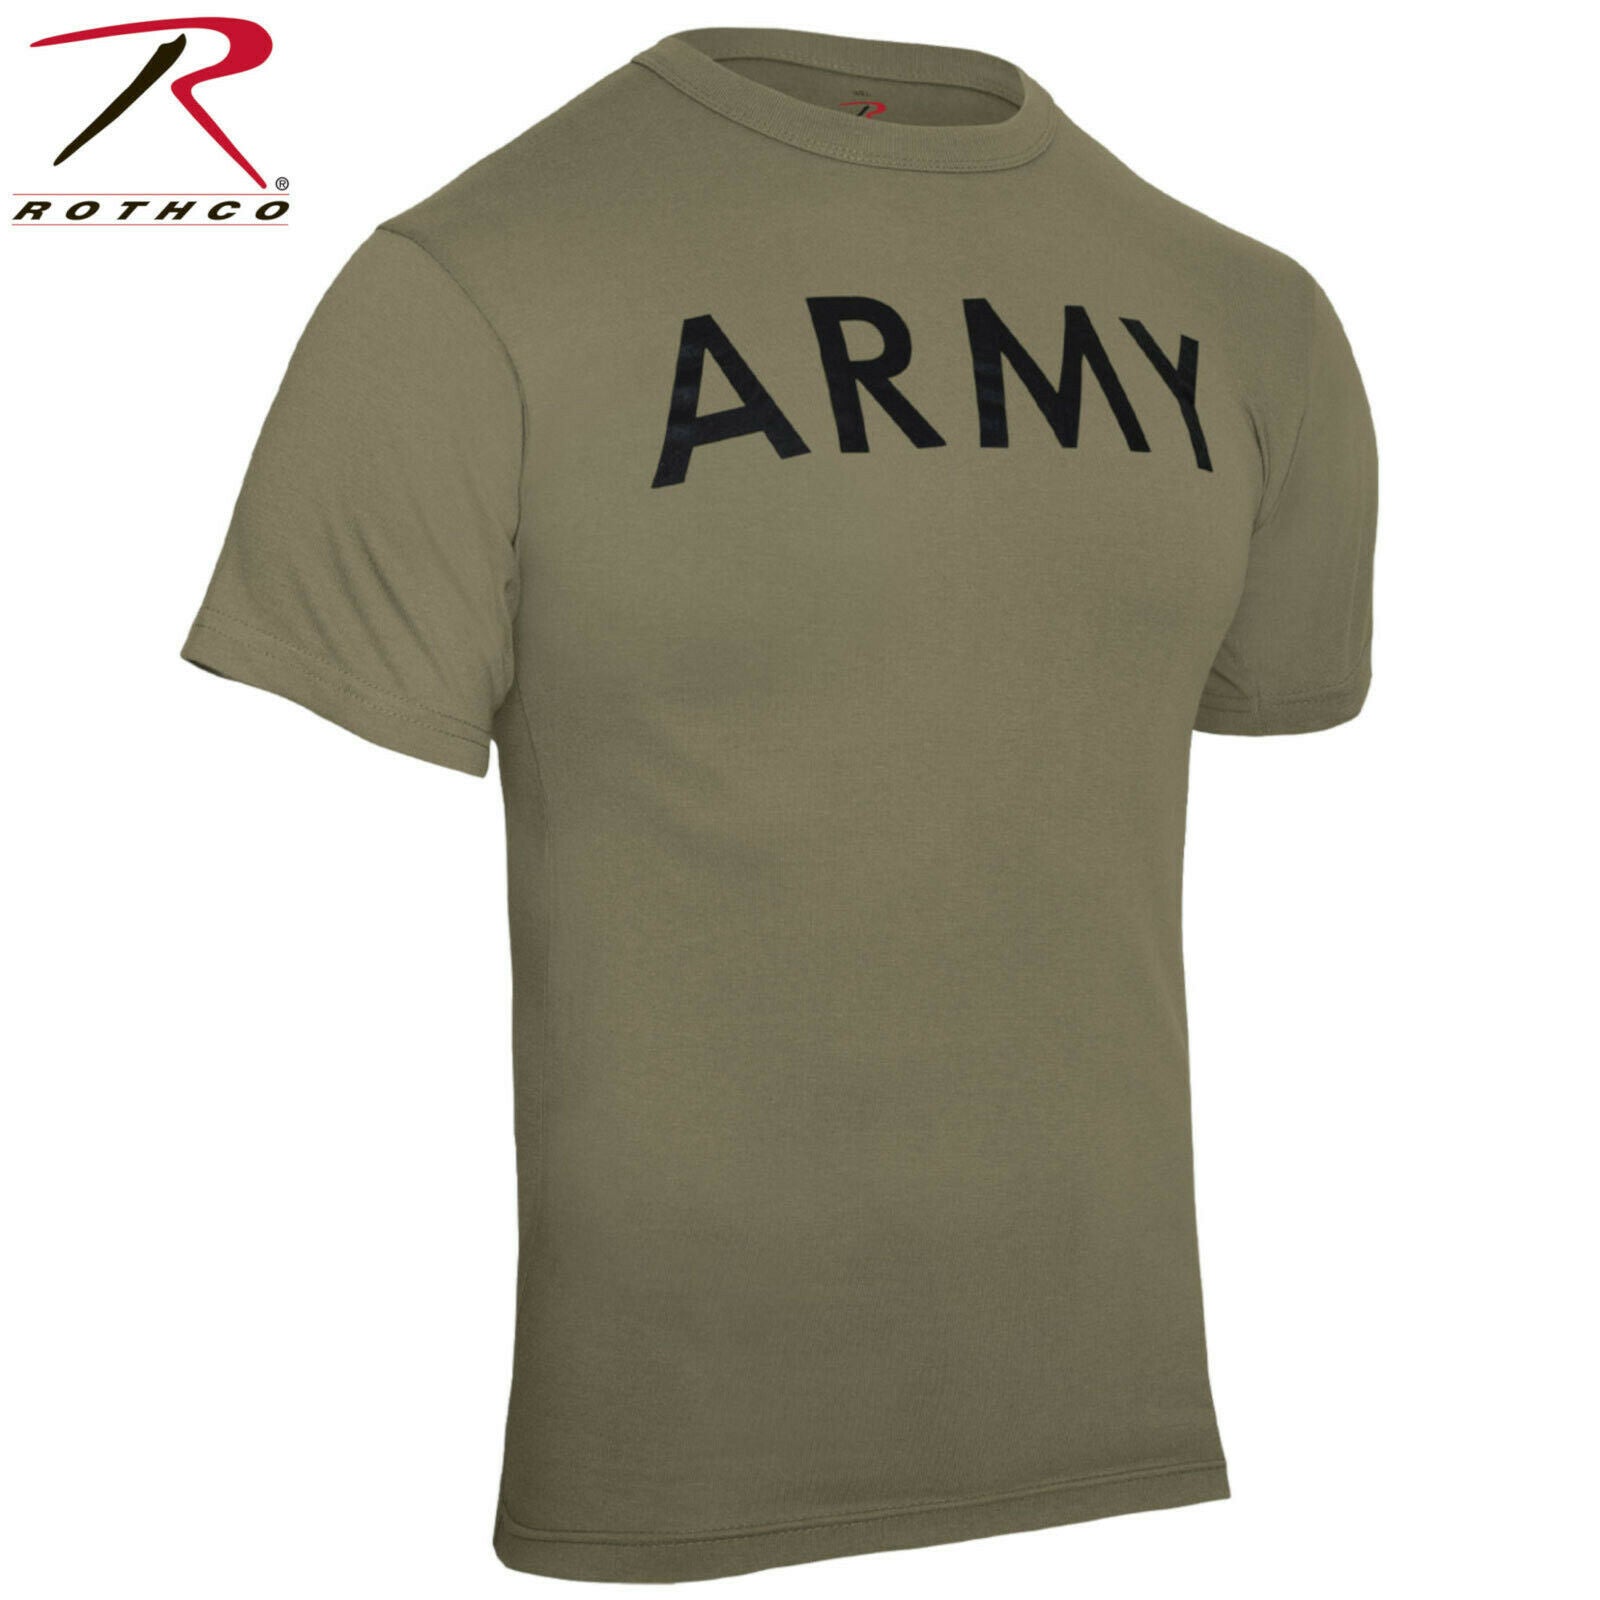 The Army Is Ditching Its Gray PT Uniforms For This Fancy New